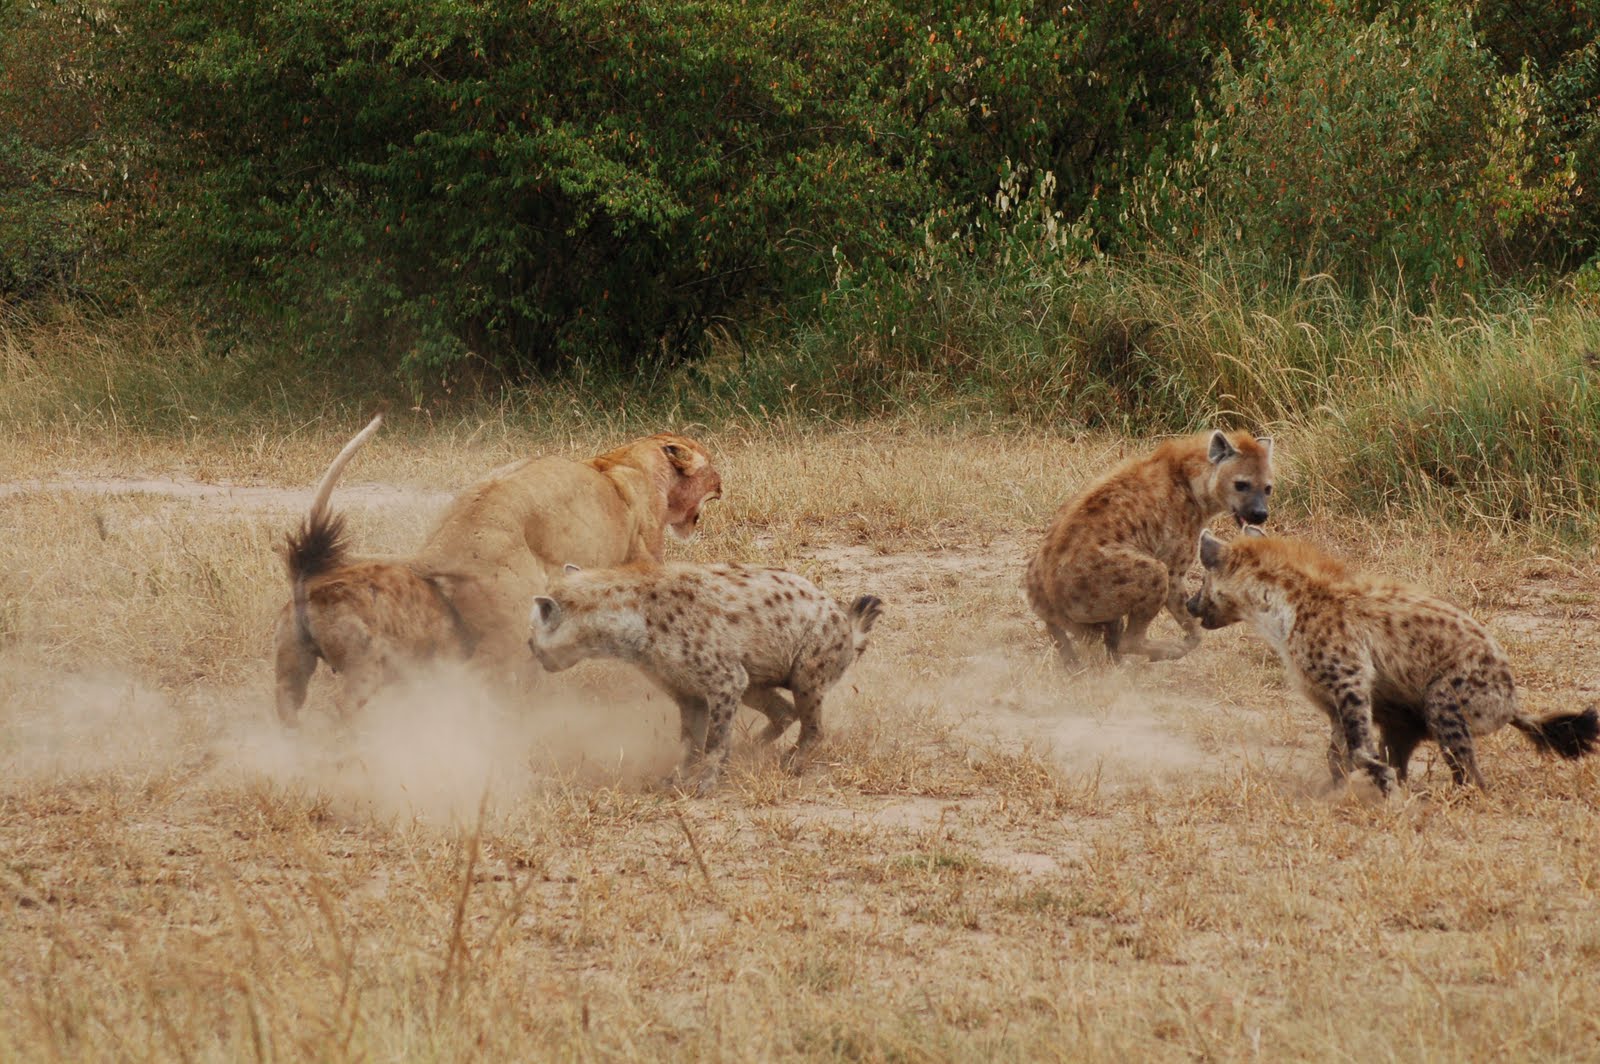 One spotted hyena approaches the rear of a lioness, whose attention is directed toward two other hyenas, which are keeping their distance.